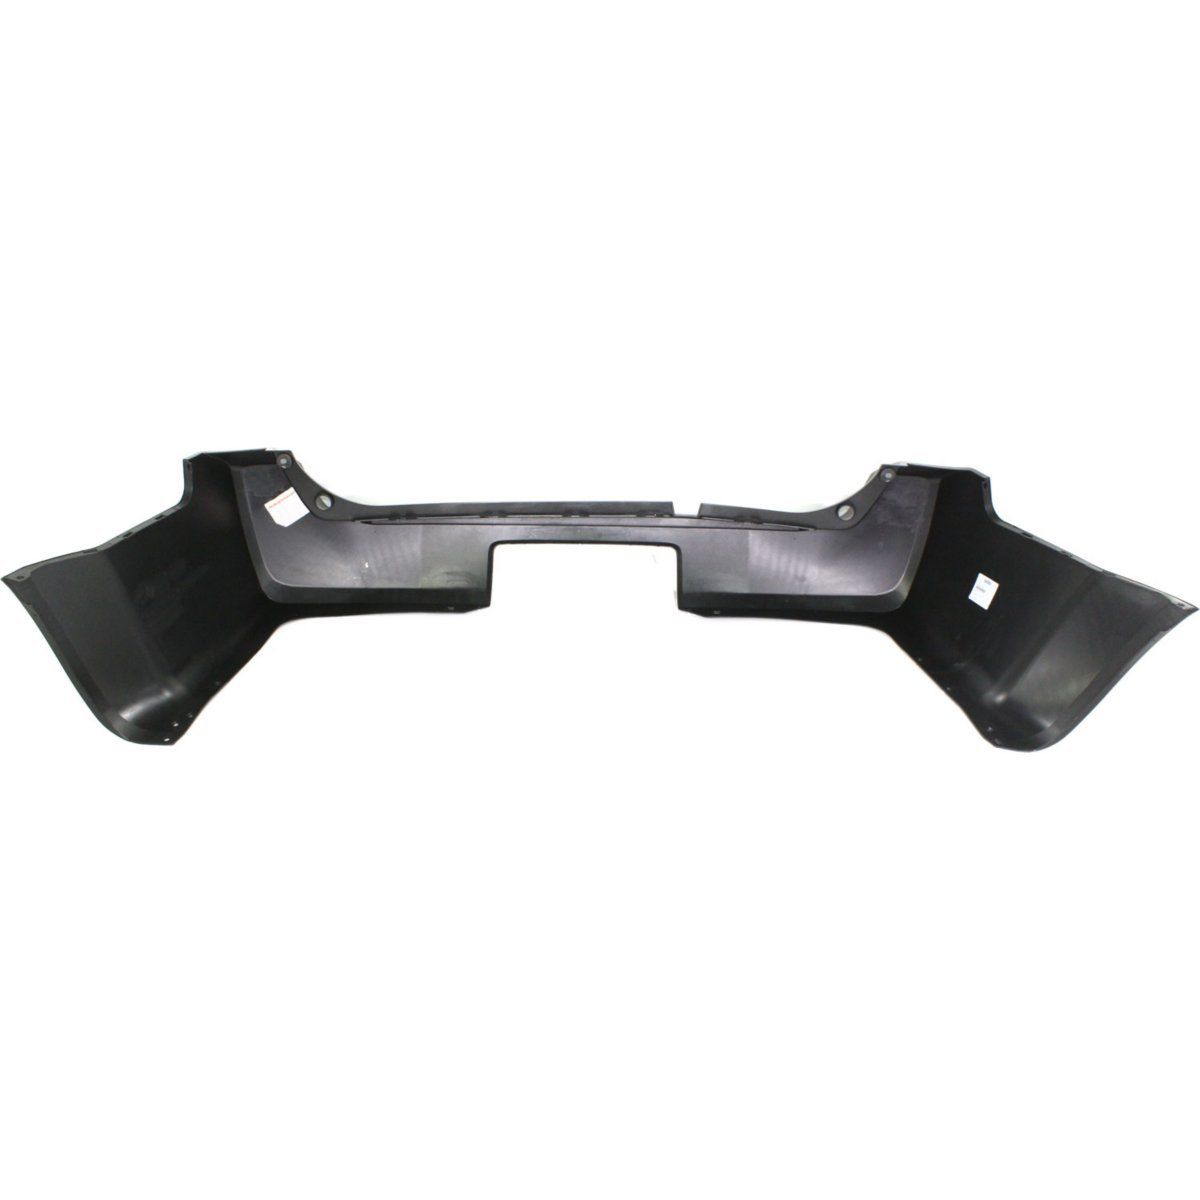 2005-2007 NISSAN PATHFINDER Rear Bumper Cover From 4-06 Painted to Match